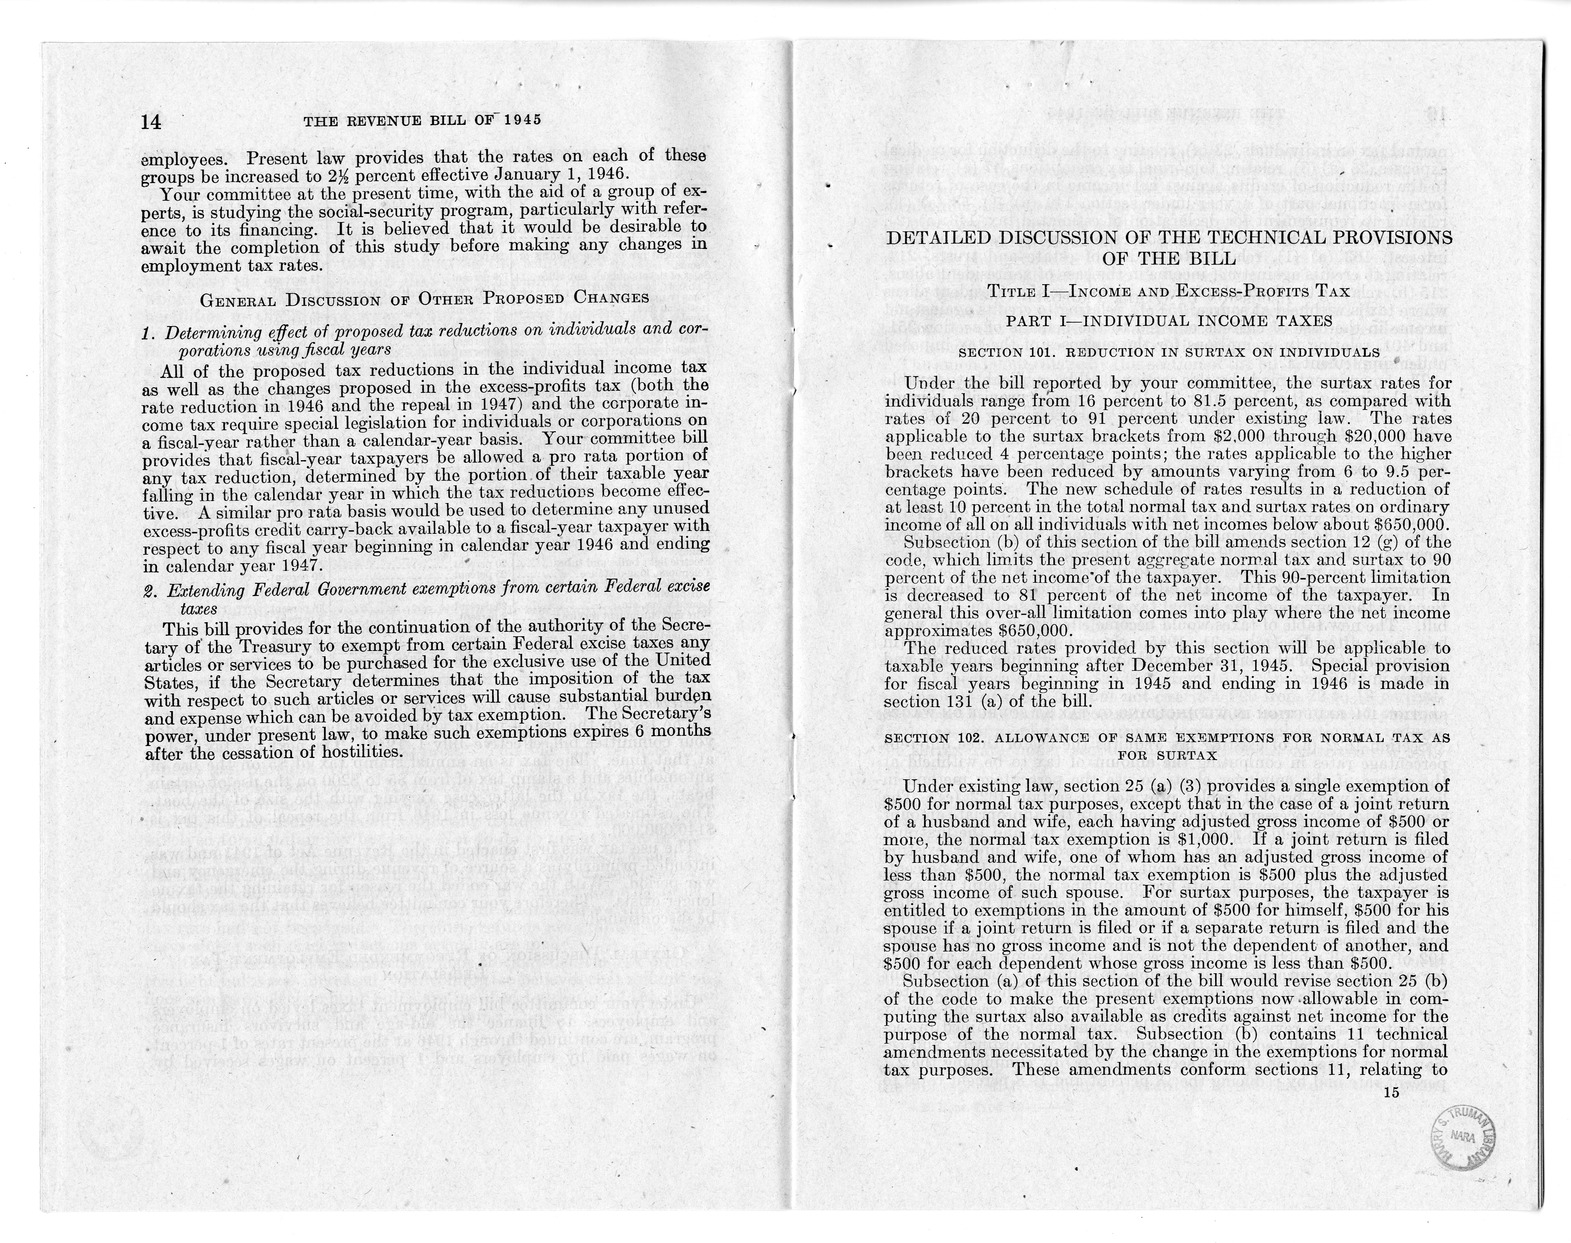 Memorandum from Harold D. Smith to M. C. Latta, H.R. 4309, To Reduce Taxation, and for Other Purposes, with Attachments